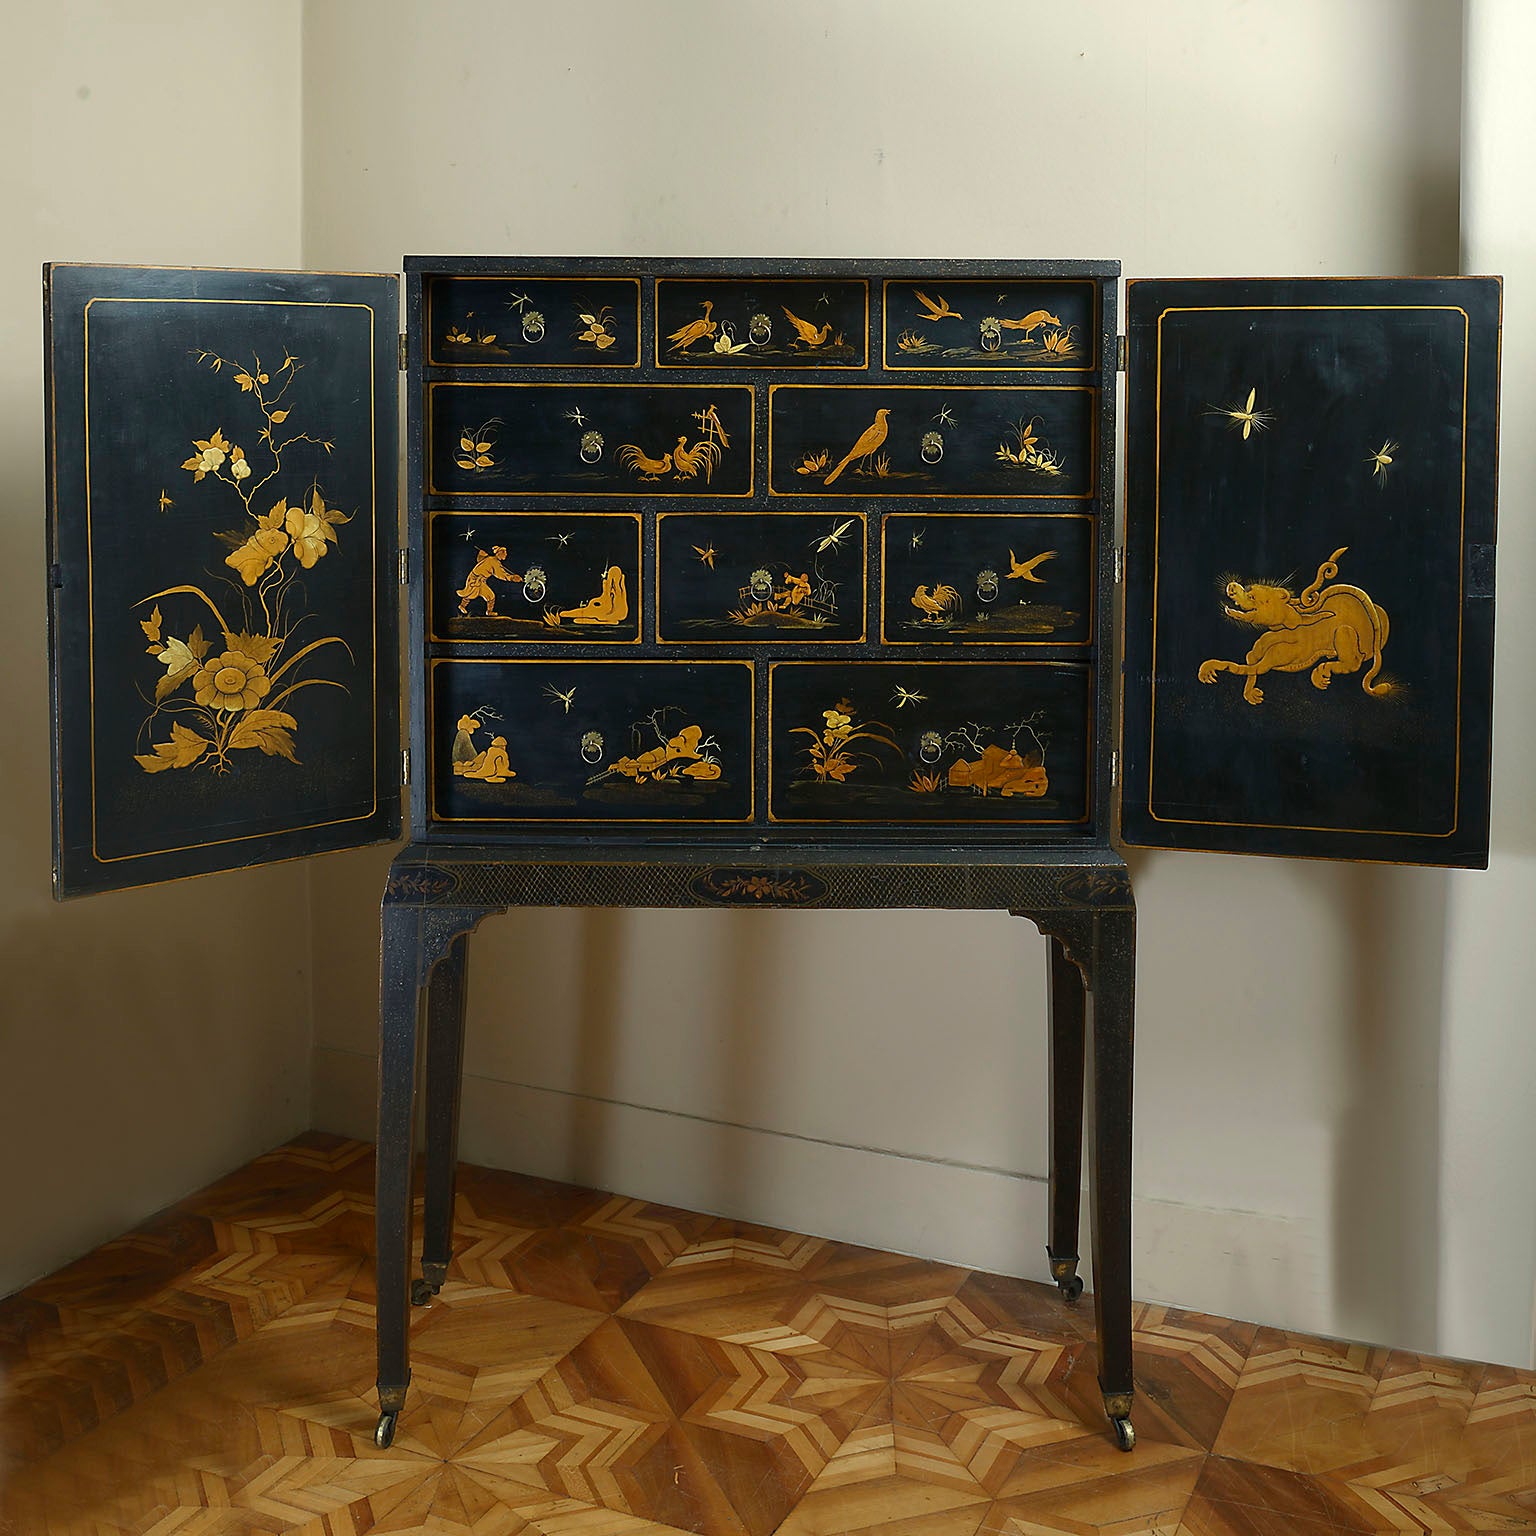 Rare George 1 Japanned Cabinet on Stand